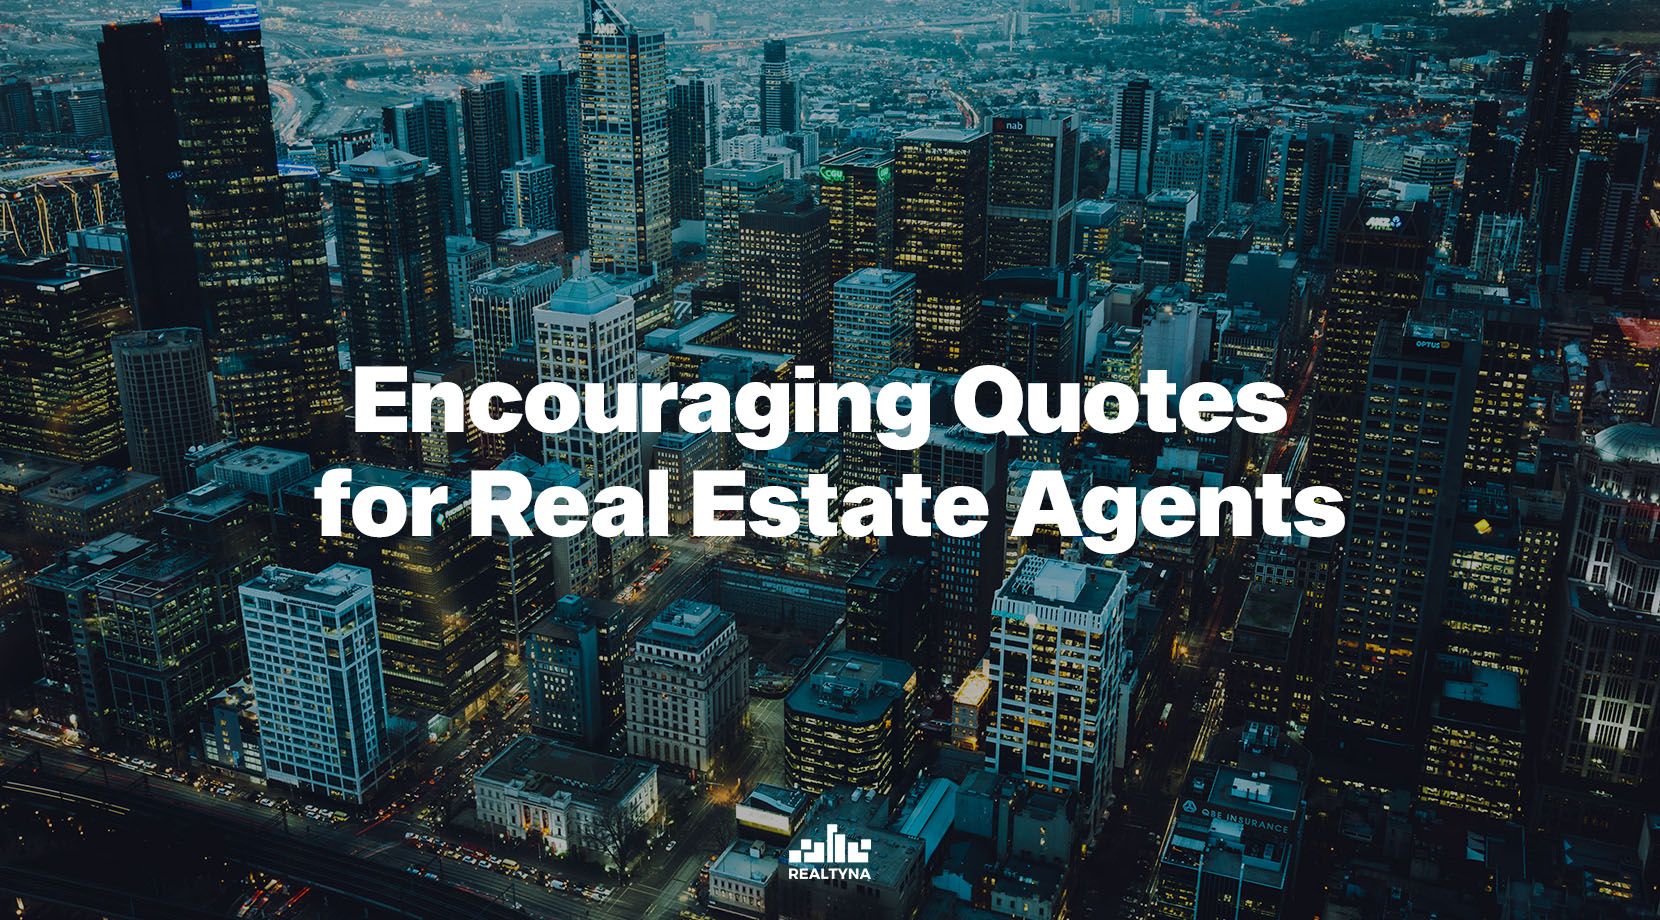 Encouraging Quotes for Real Estate Agents